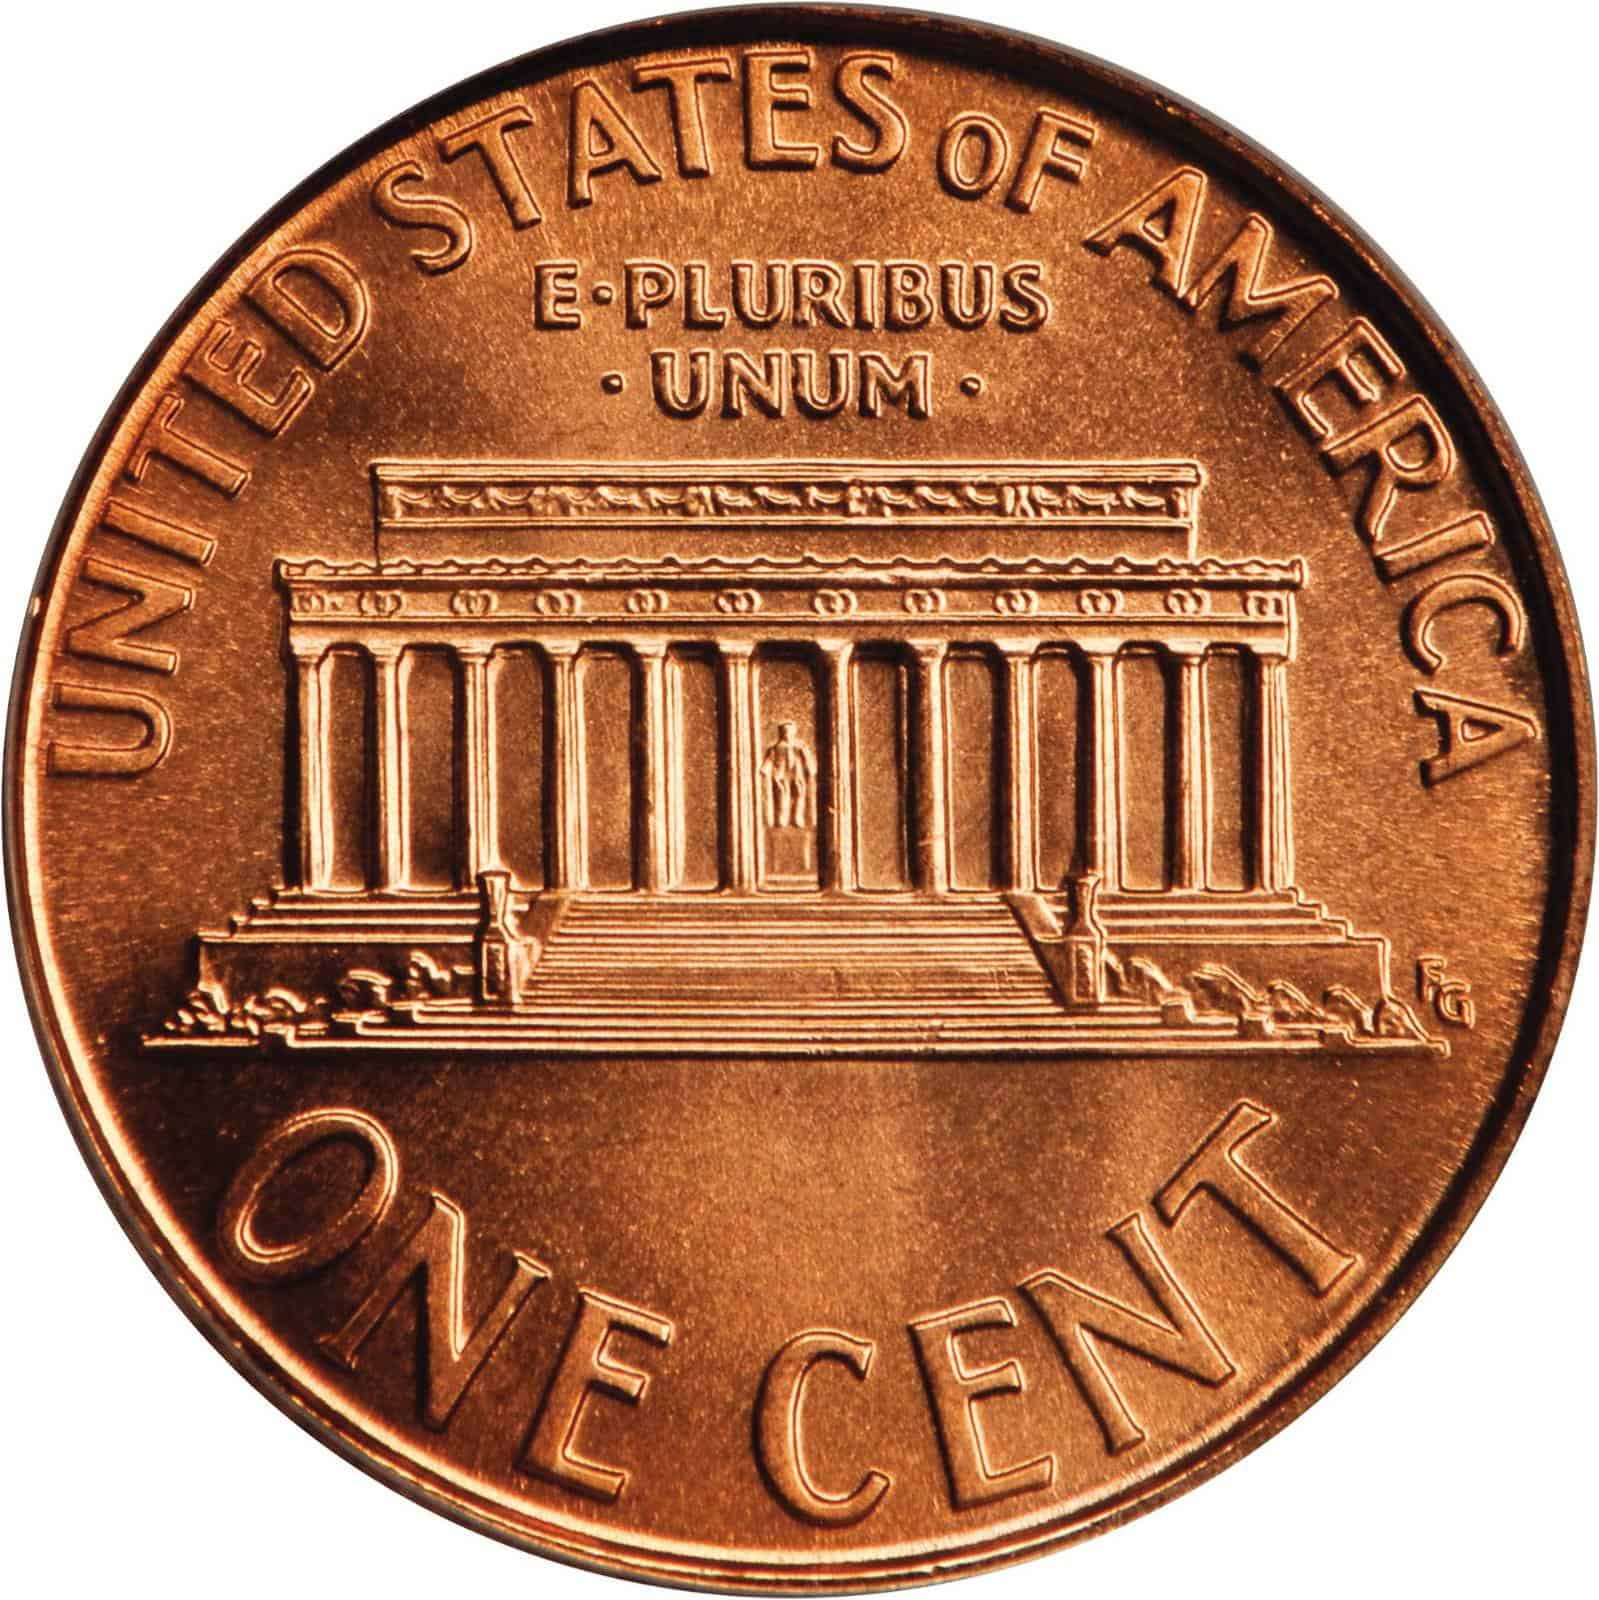 The reverse of the 1996 Lincoln penny